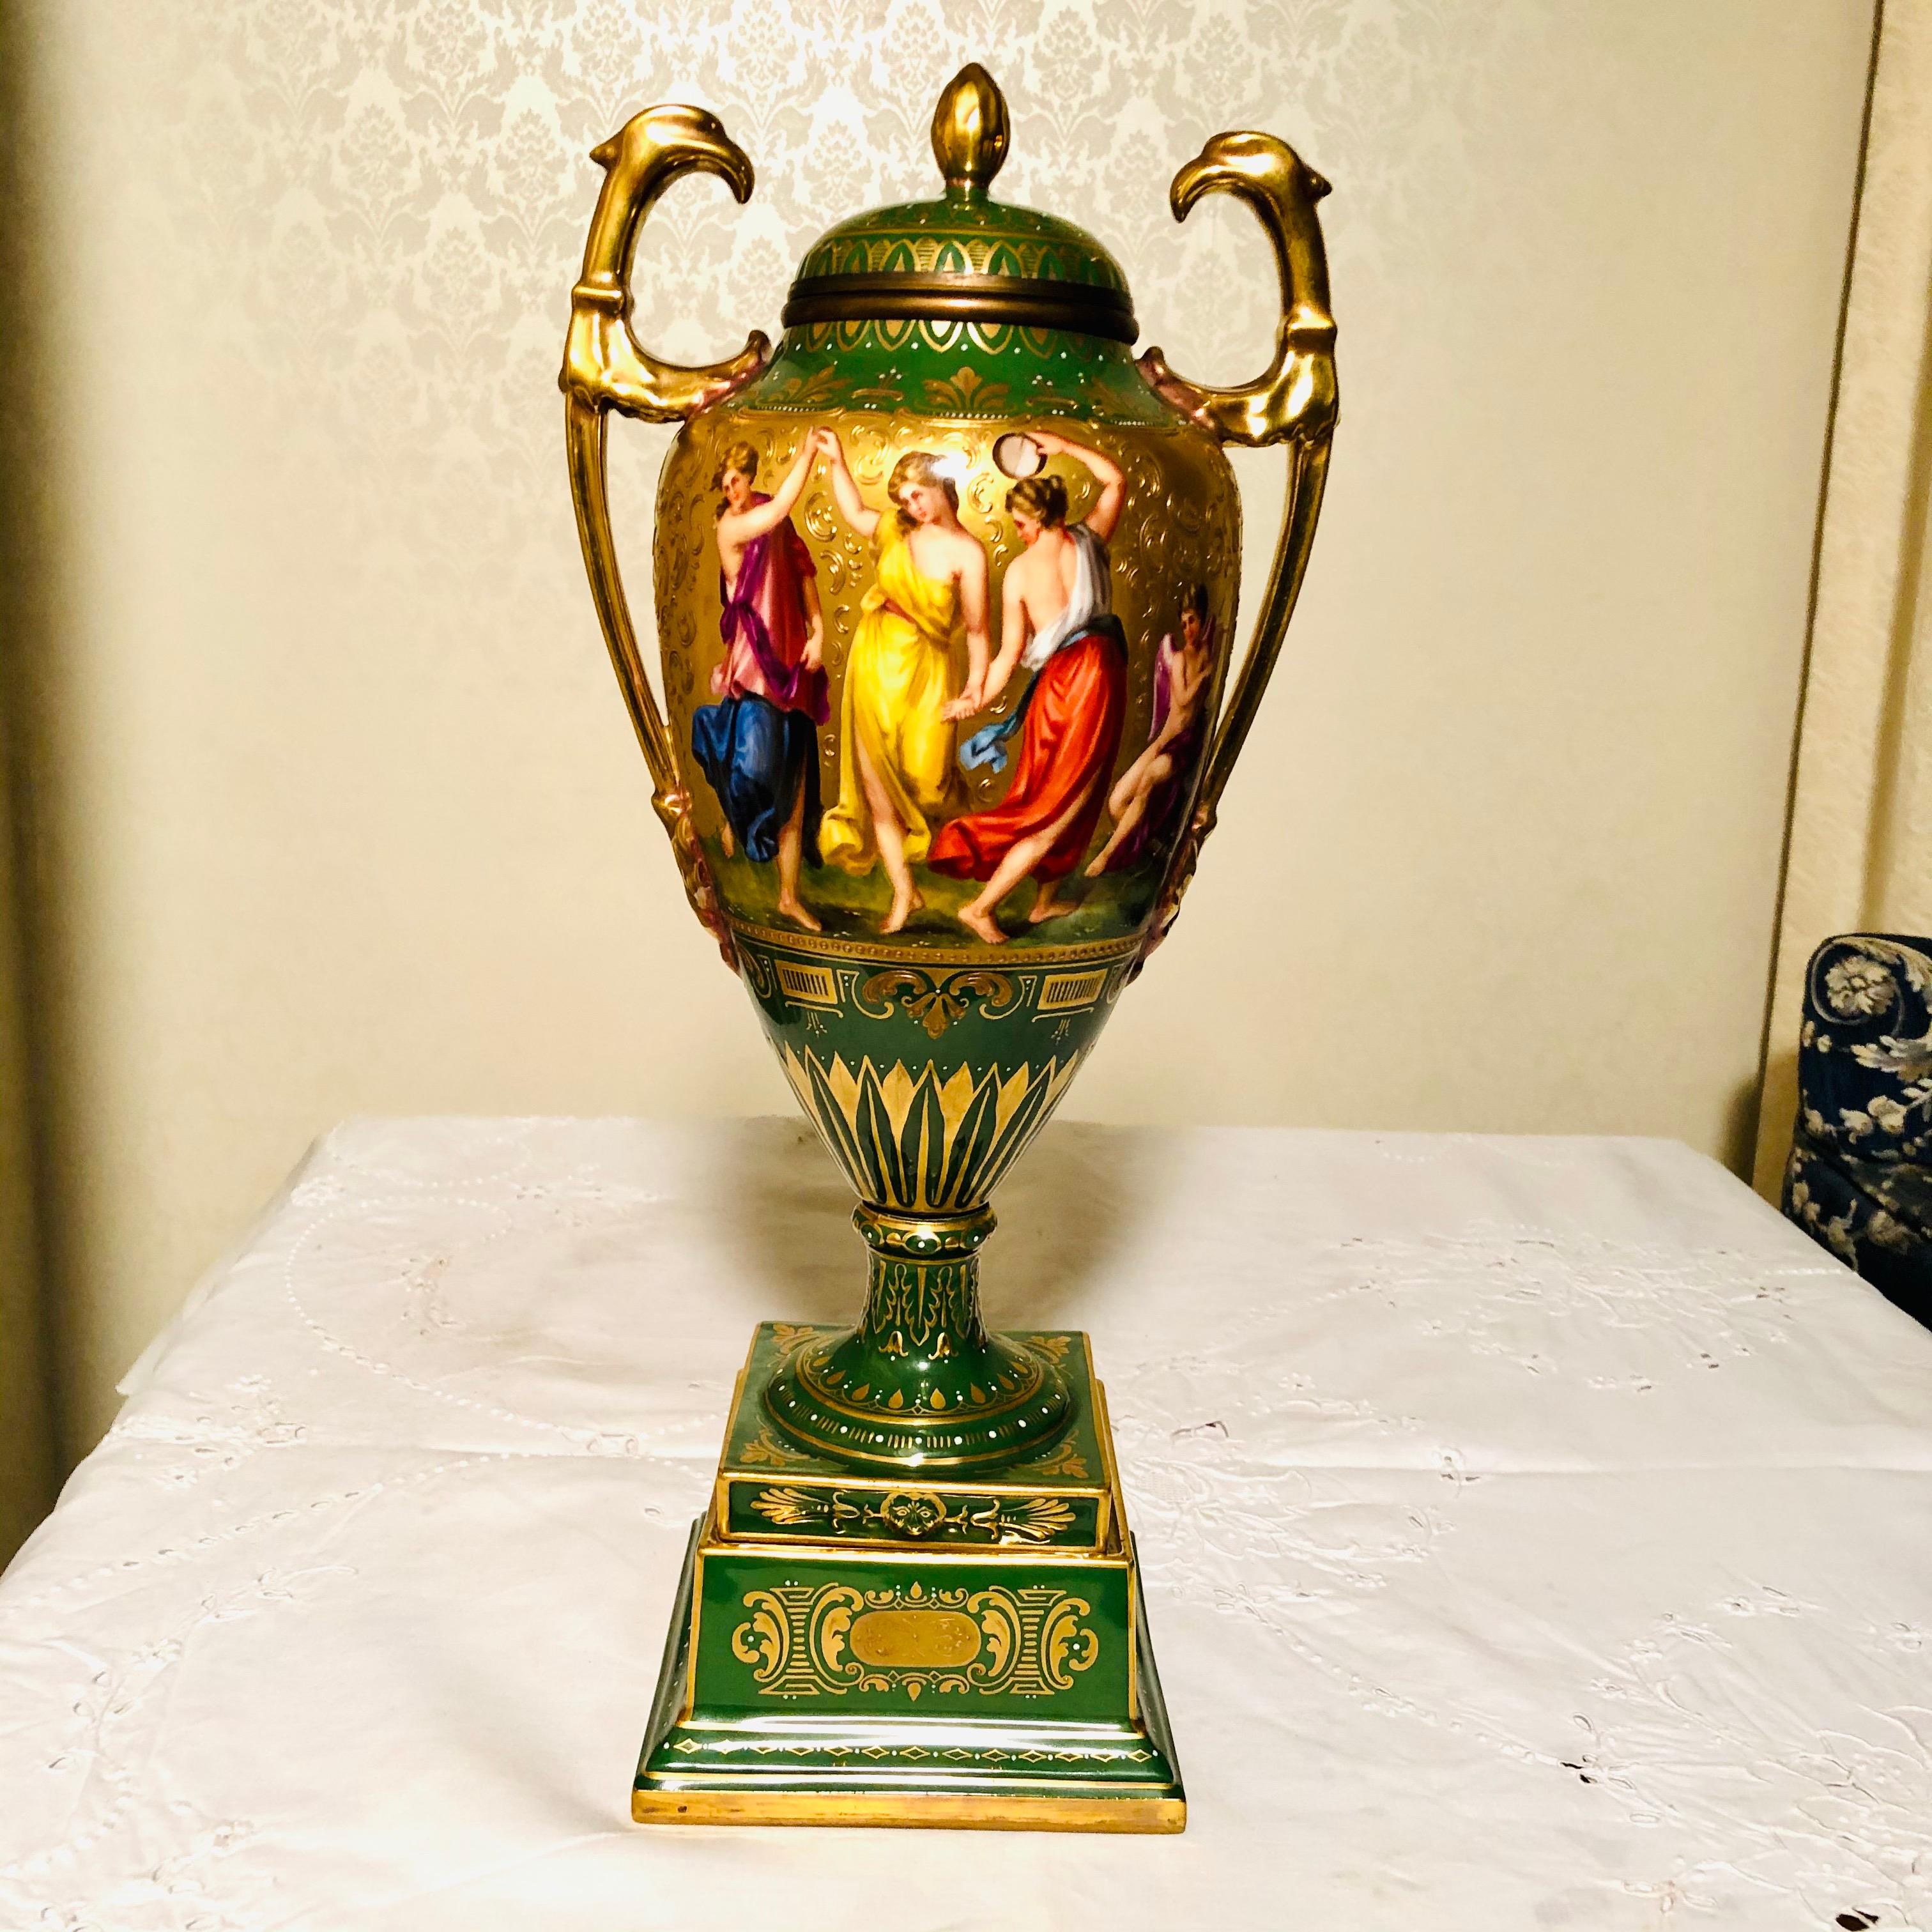 Austrian “Royal Vienna” Covered Urn Signed A. Heer with Exquisite Paintings on Both Sides For Sale